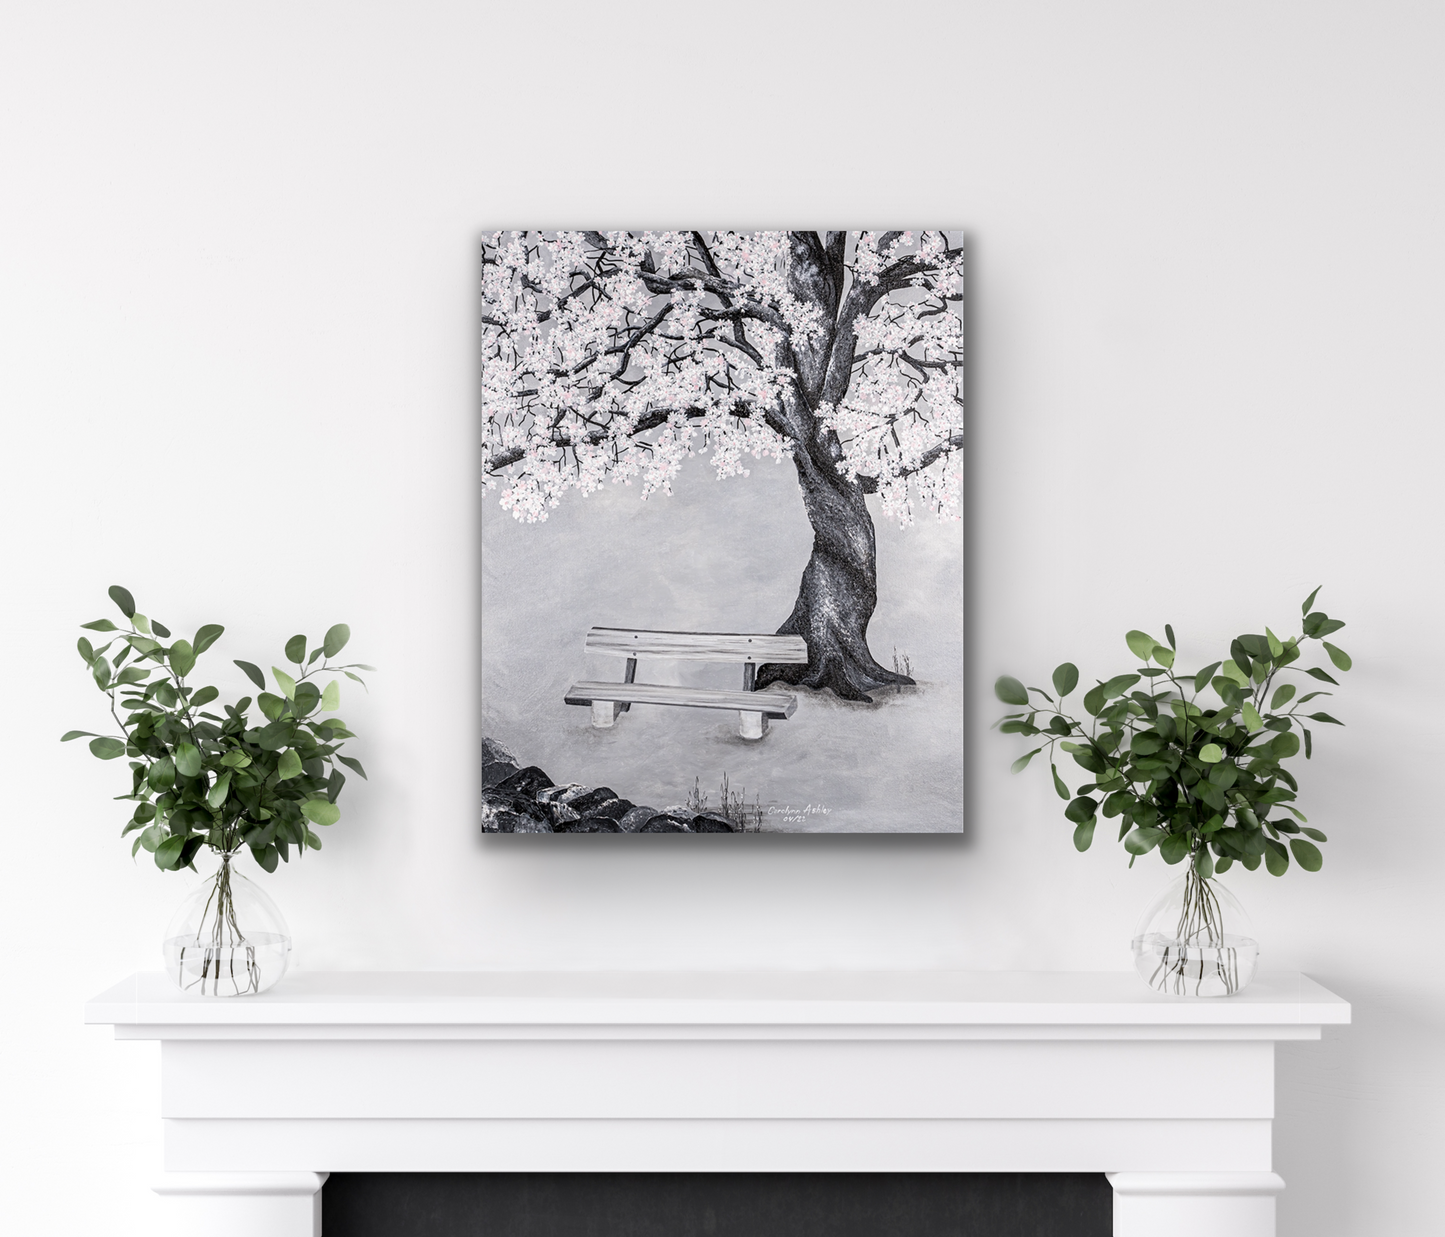 "Enchanting" art work comes in three different canvas print sizes to fit your wall perfectly.